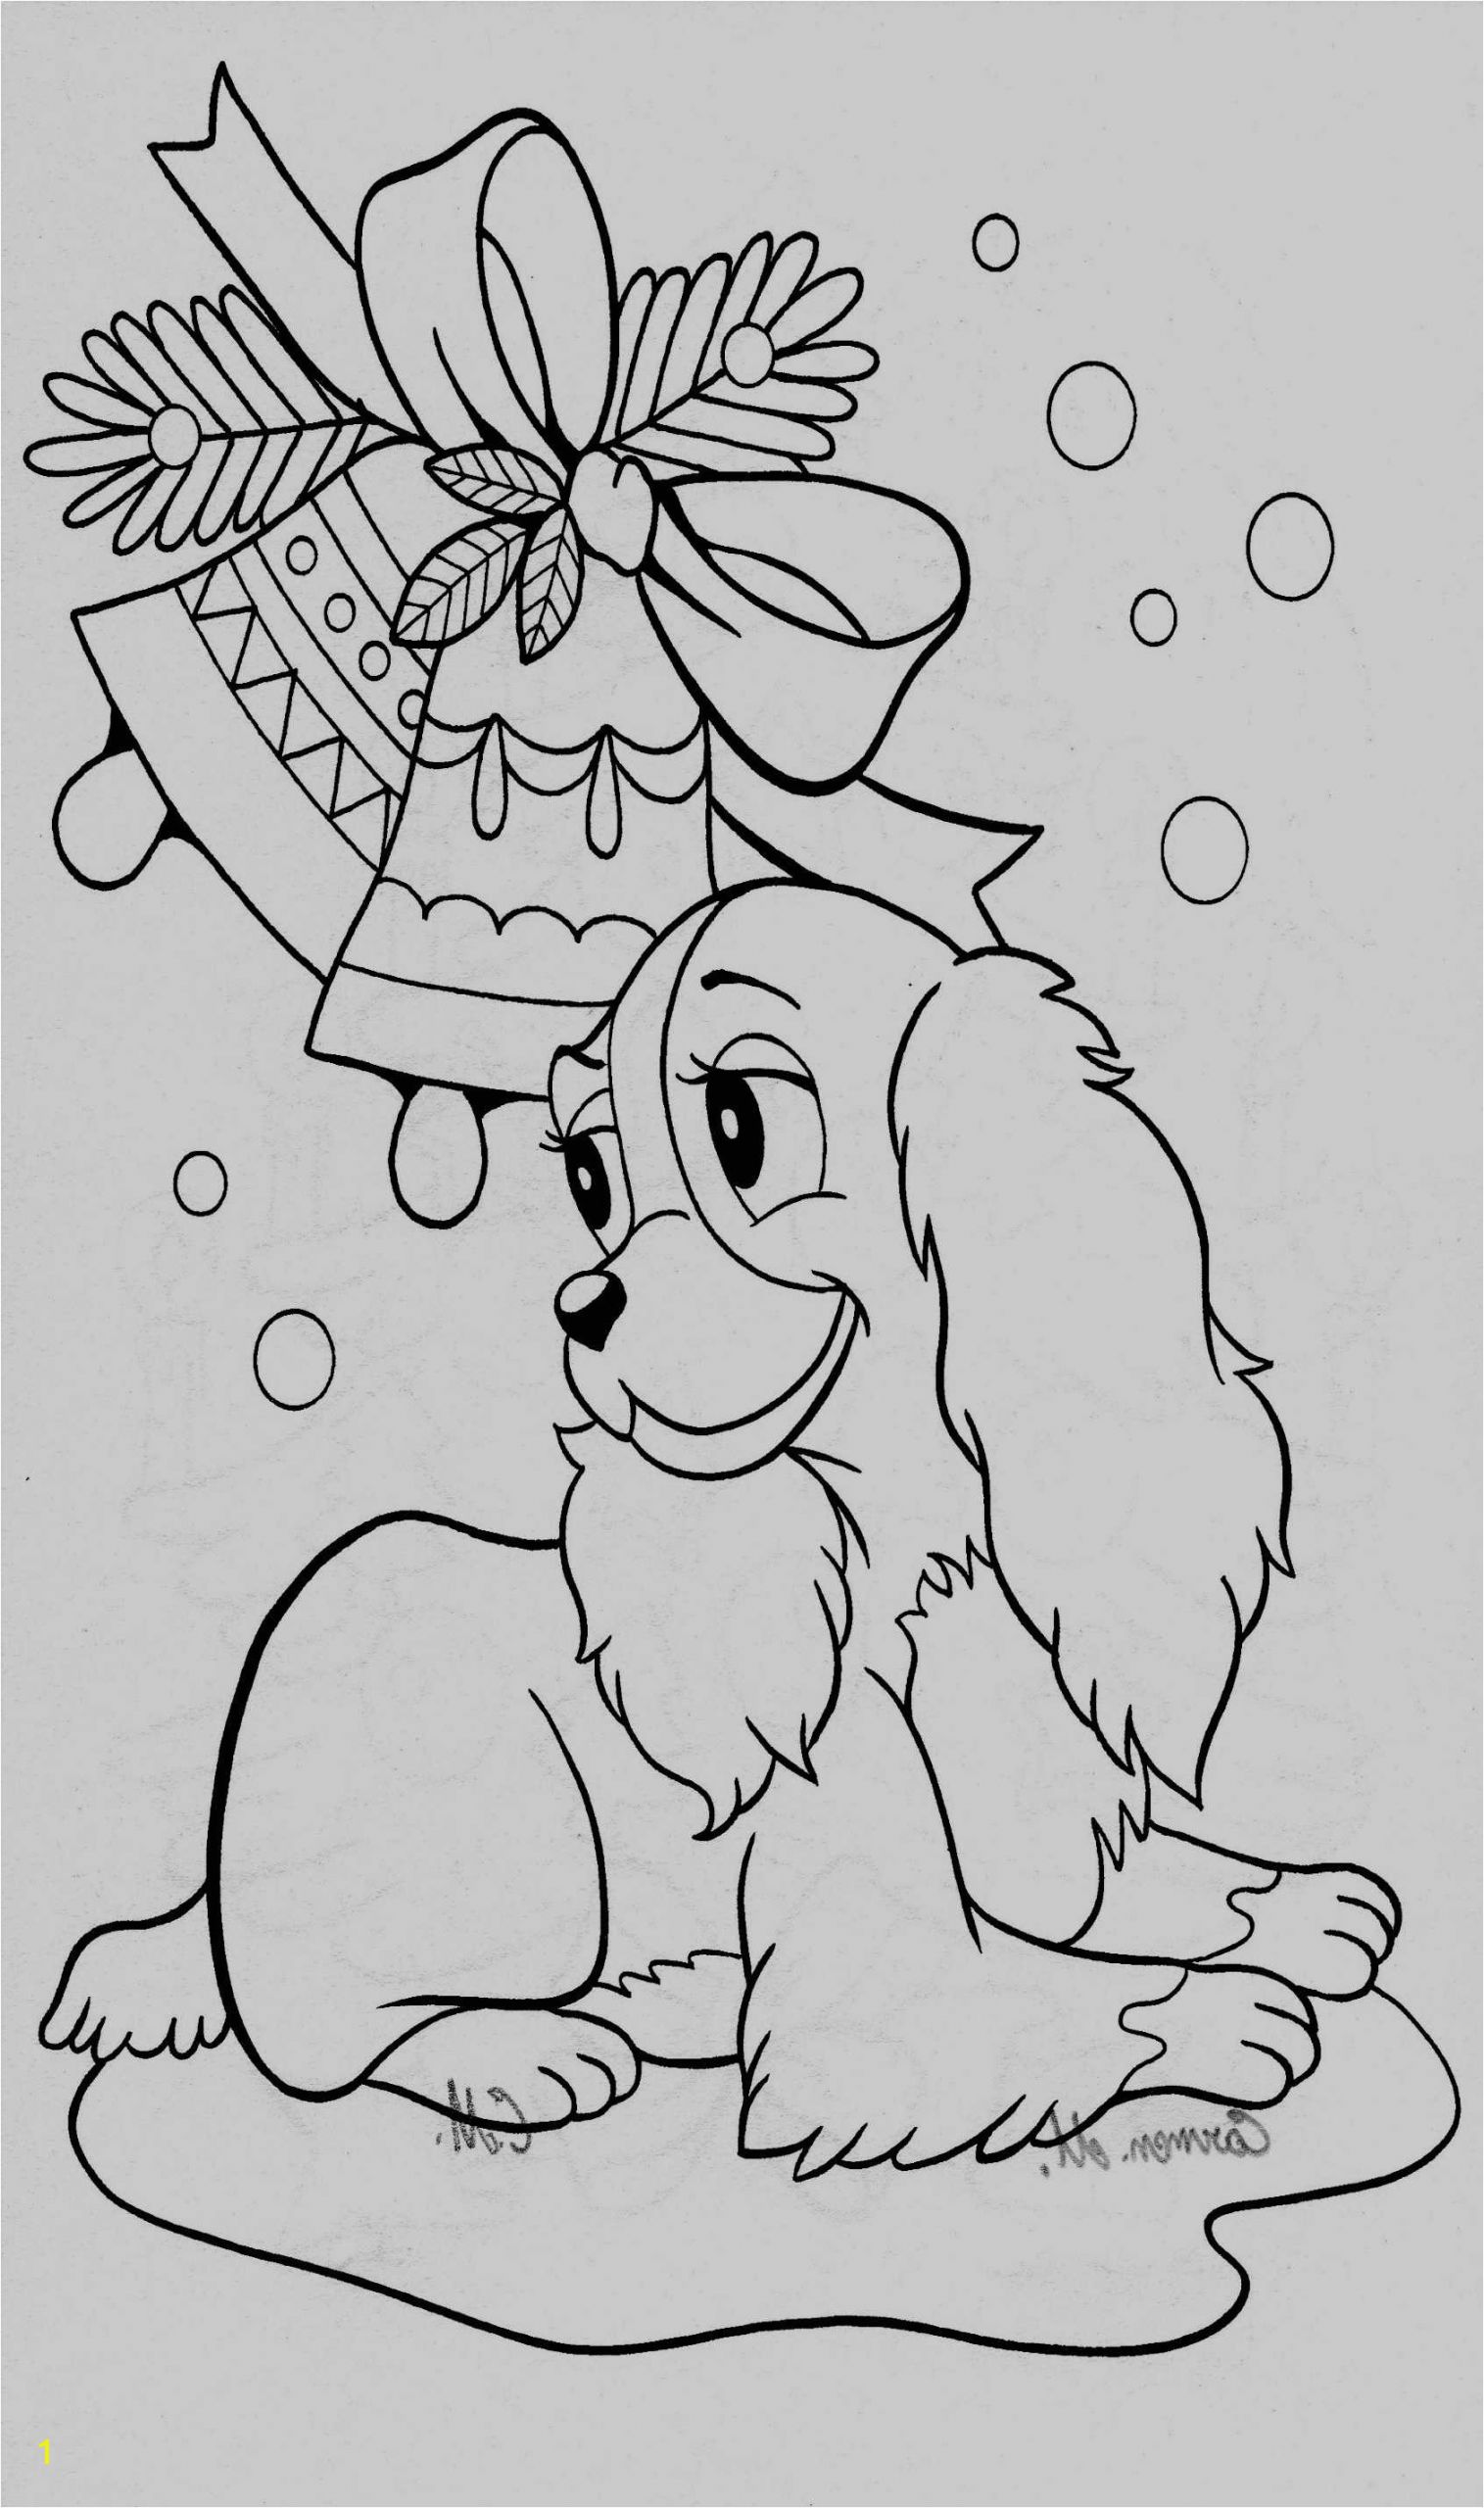 paw patrol coloring page free elegant photography coloring book ideas bubbleies coloring pages printable od dog free of paw patrol coloring page free